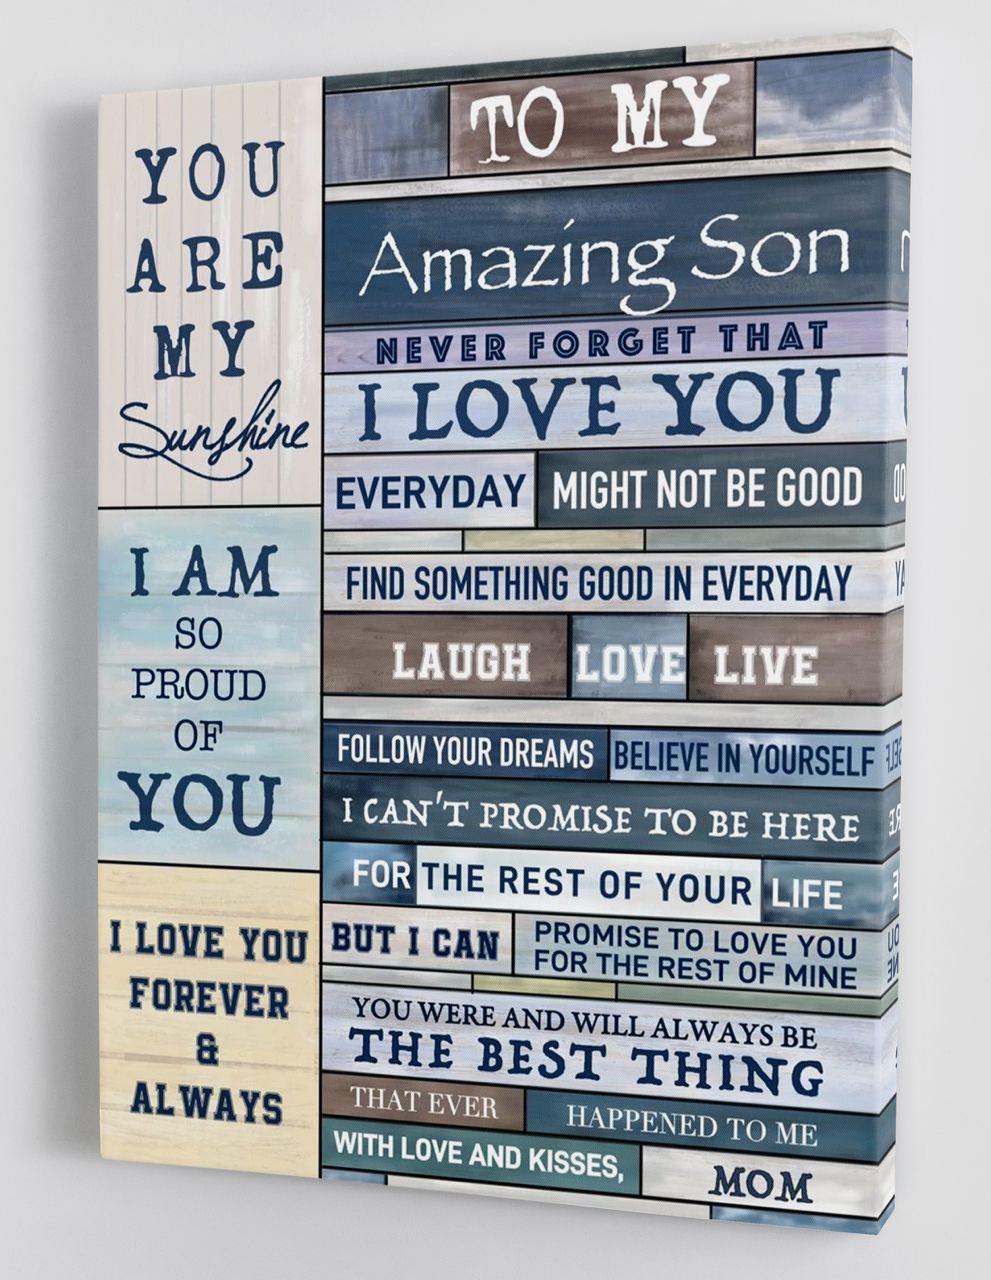 To My Son - From Mom - Framed Canvas Gift MS033 - DivesArt LLC